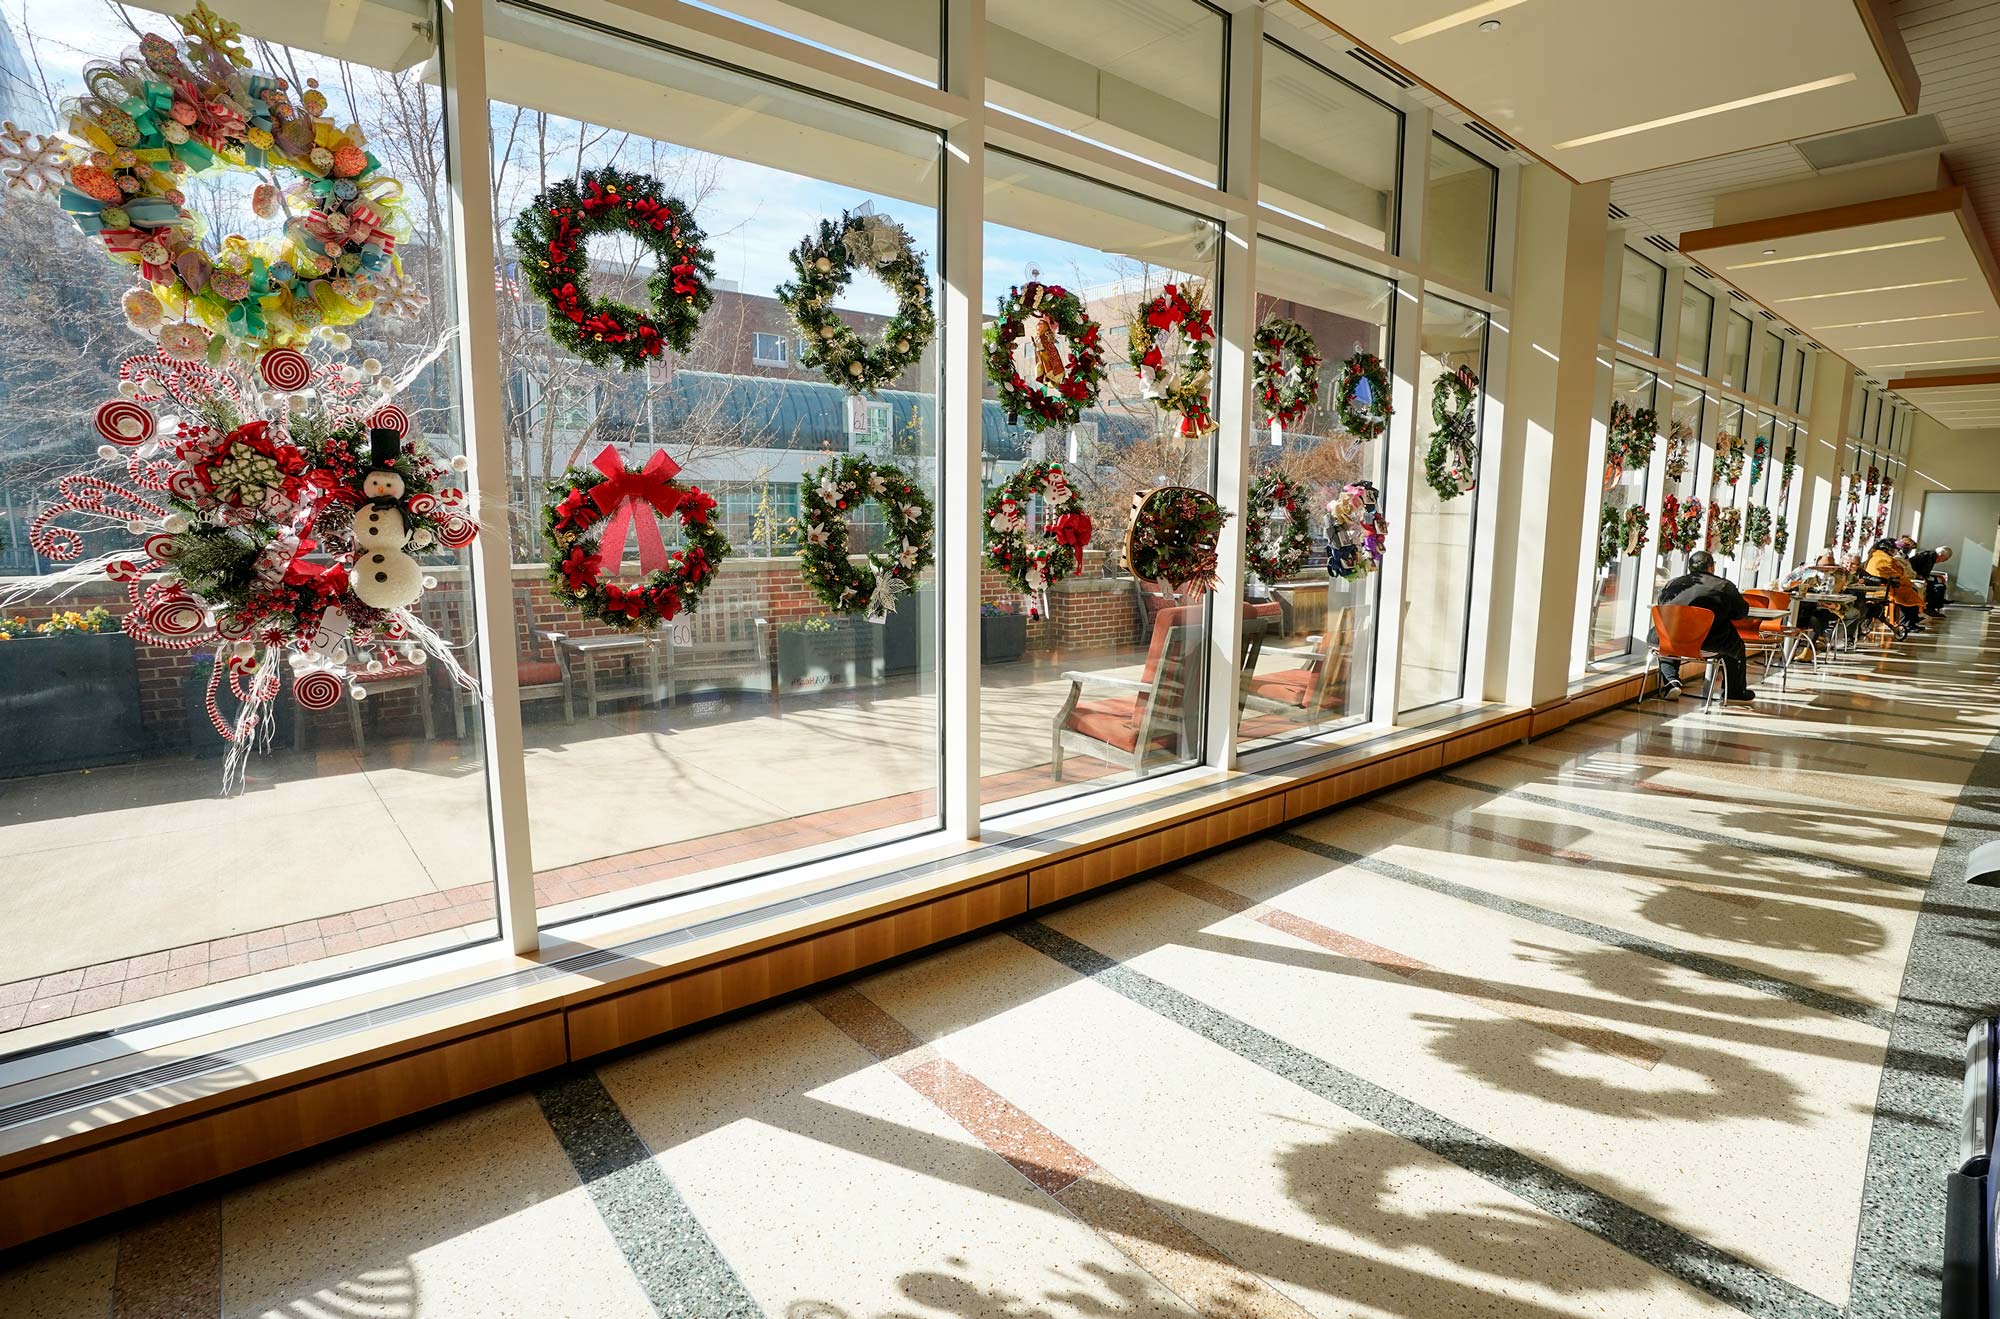 Wreaths for auction displayed down the windowed hallway